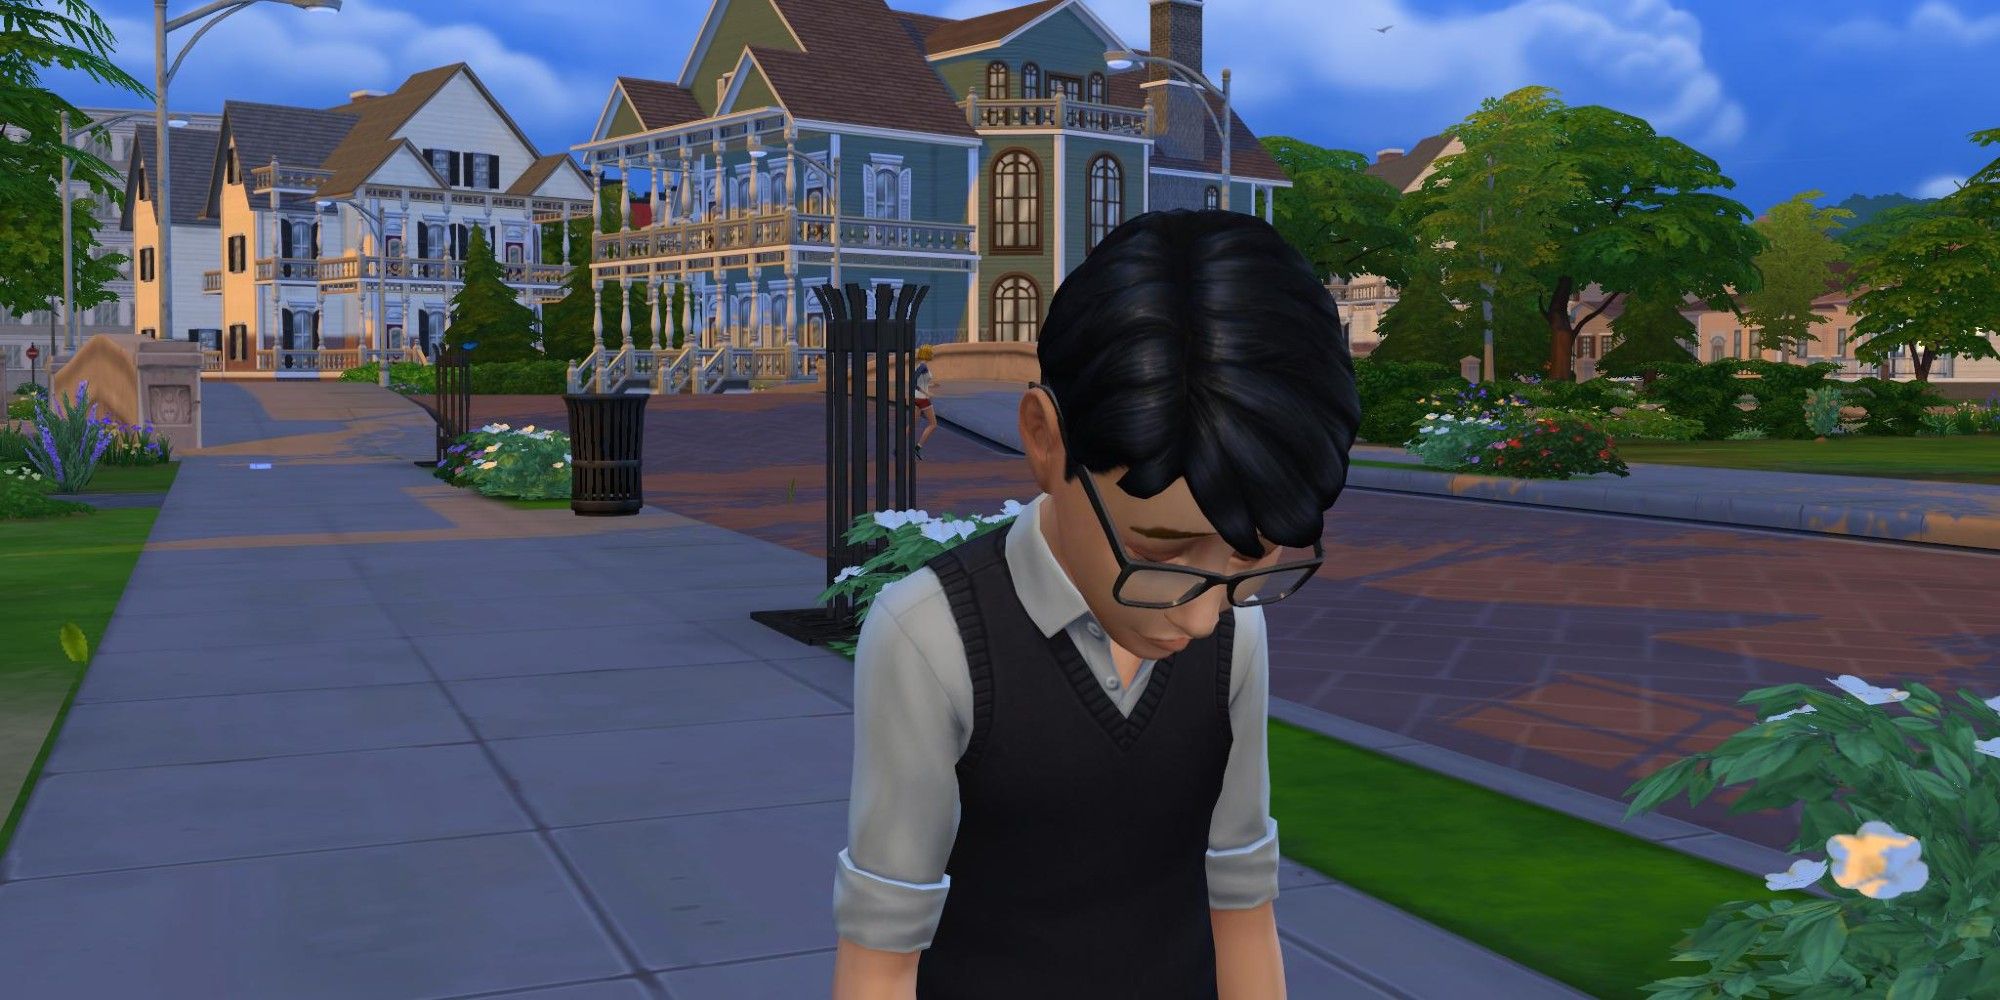 A young Sim from the Sims 4 standing on a sidewalk and looking very sad, with two mansions in the background